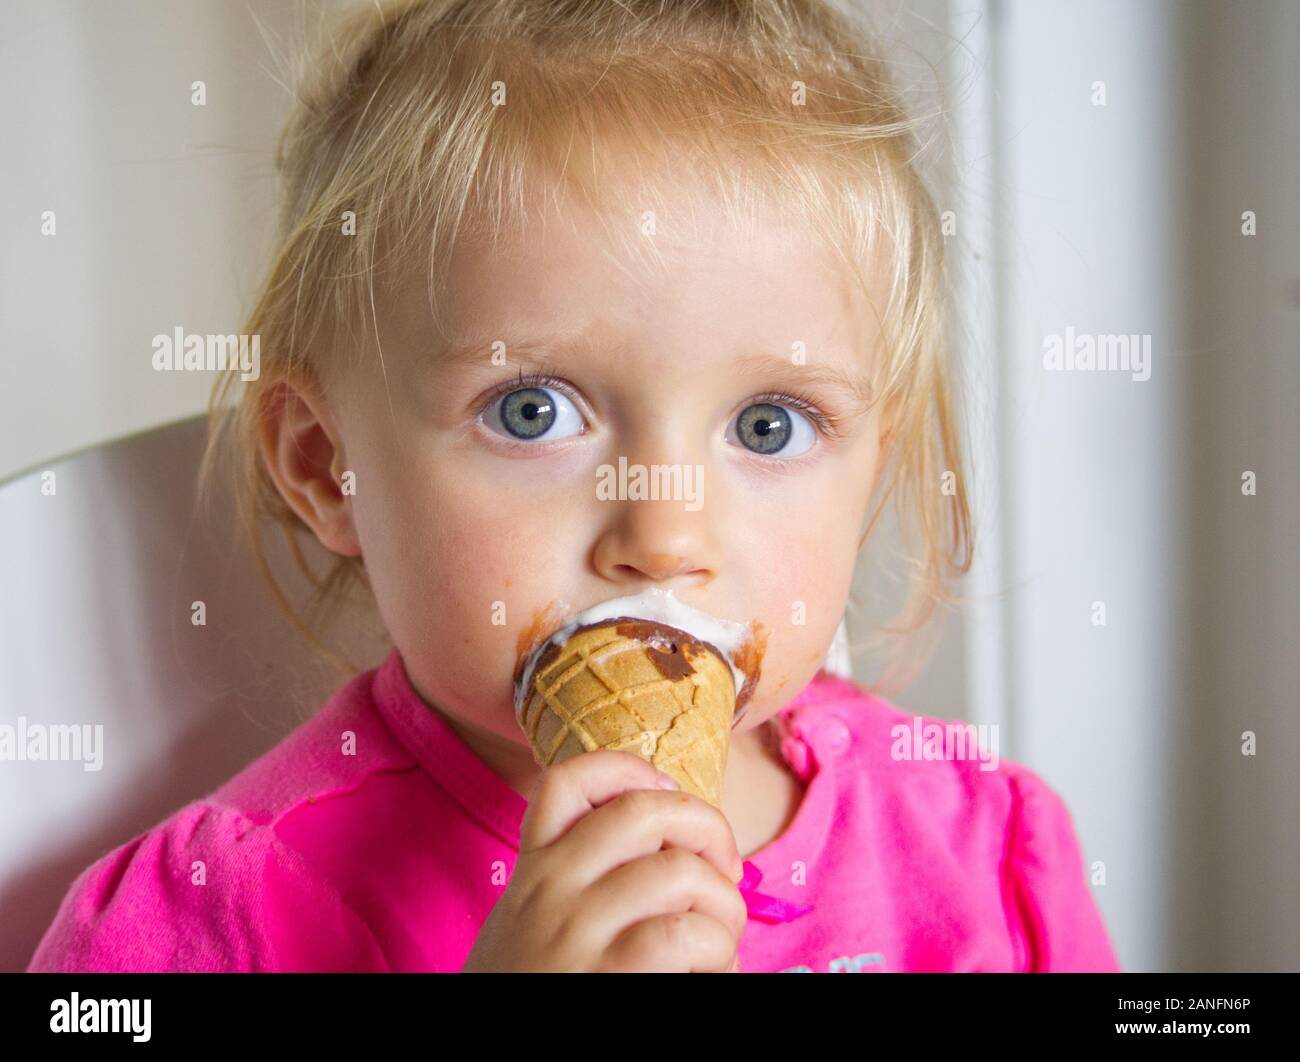 Young little girl with wide open blue eyes and blonde hair eating ice cream Stock Photo